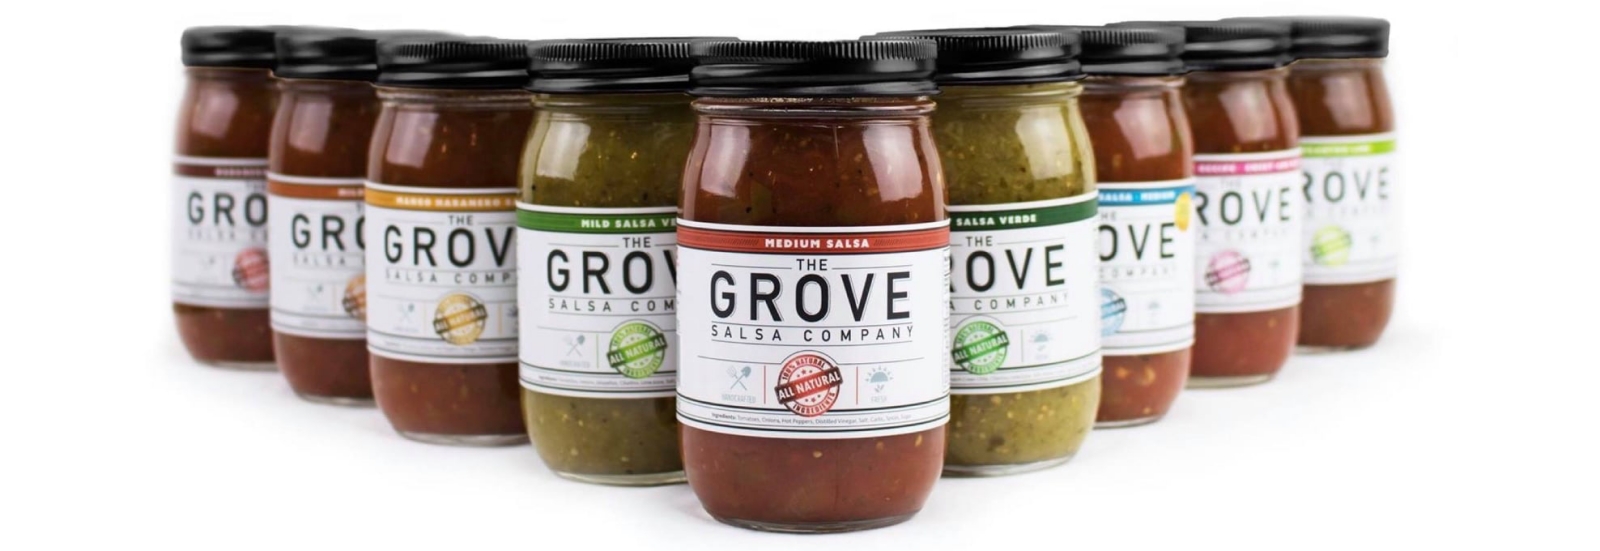 Bottles of salsa from Grove Salsa Company